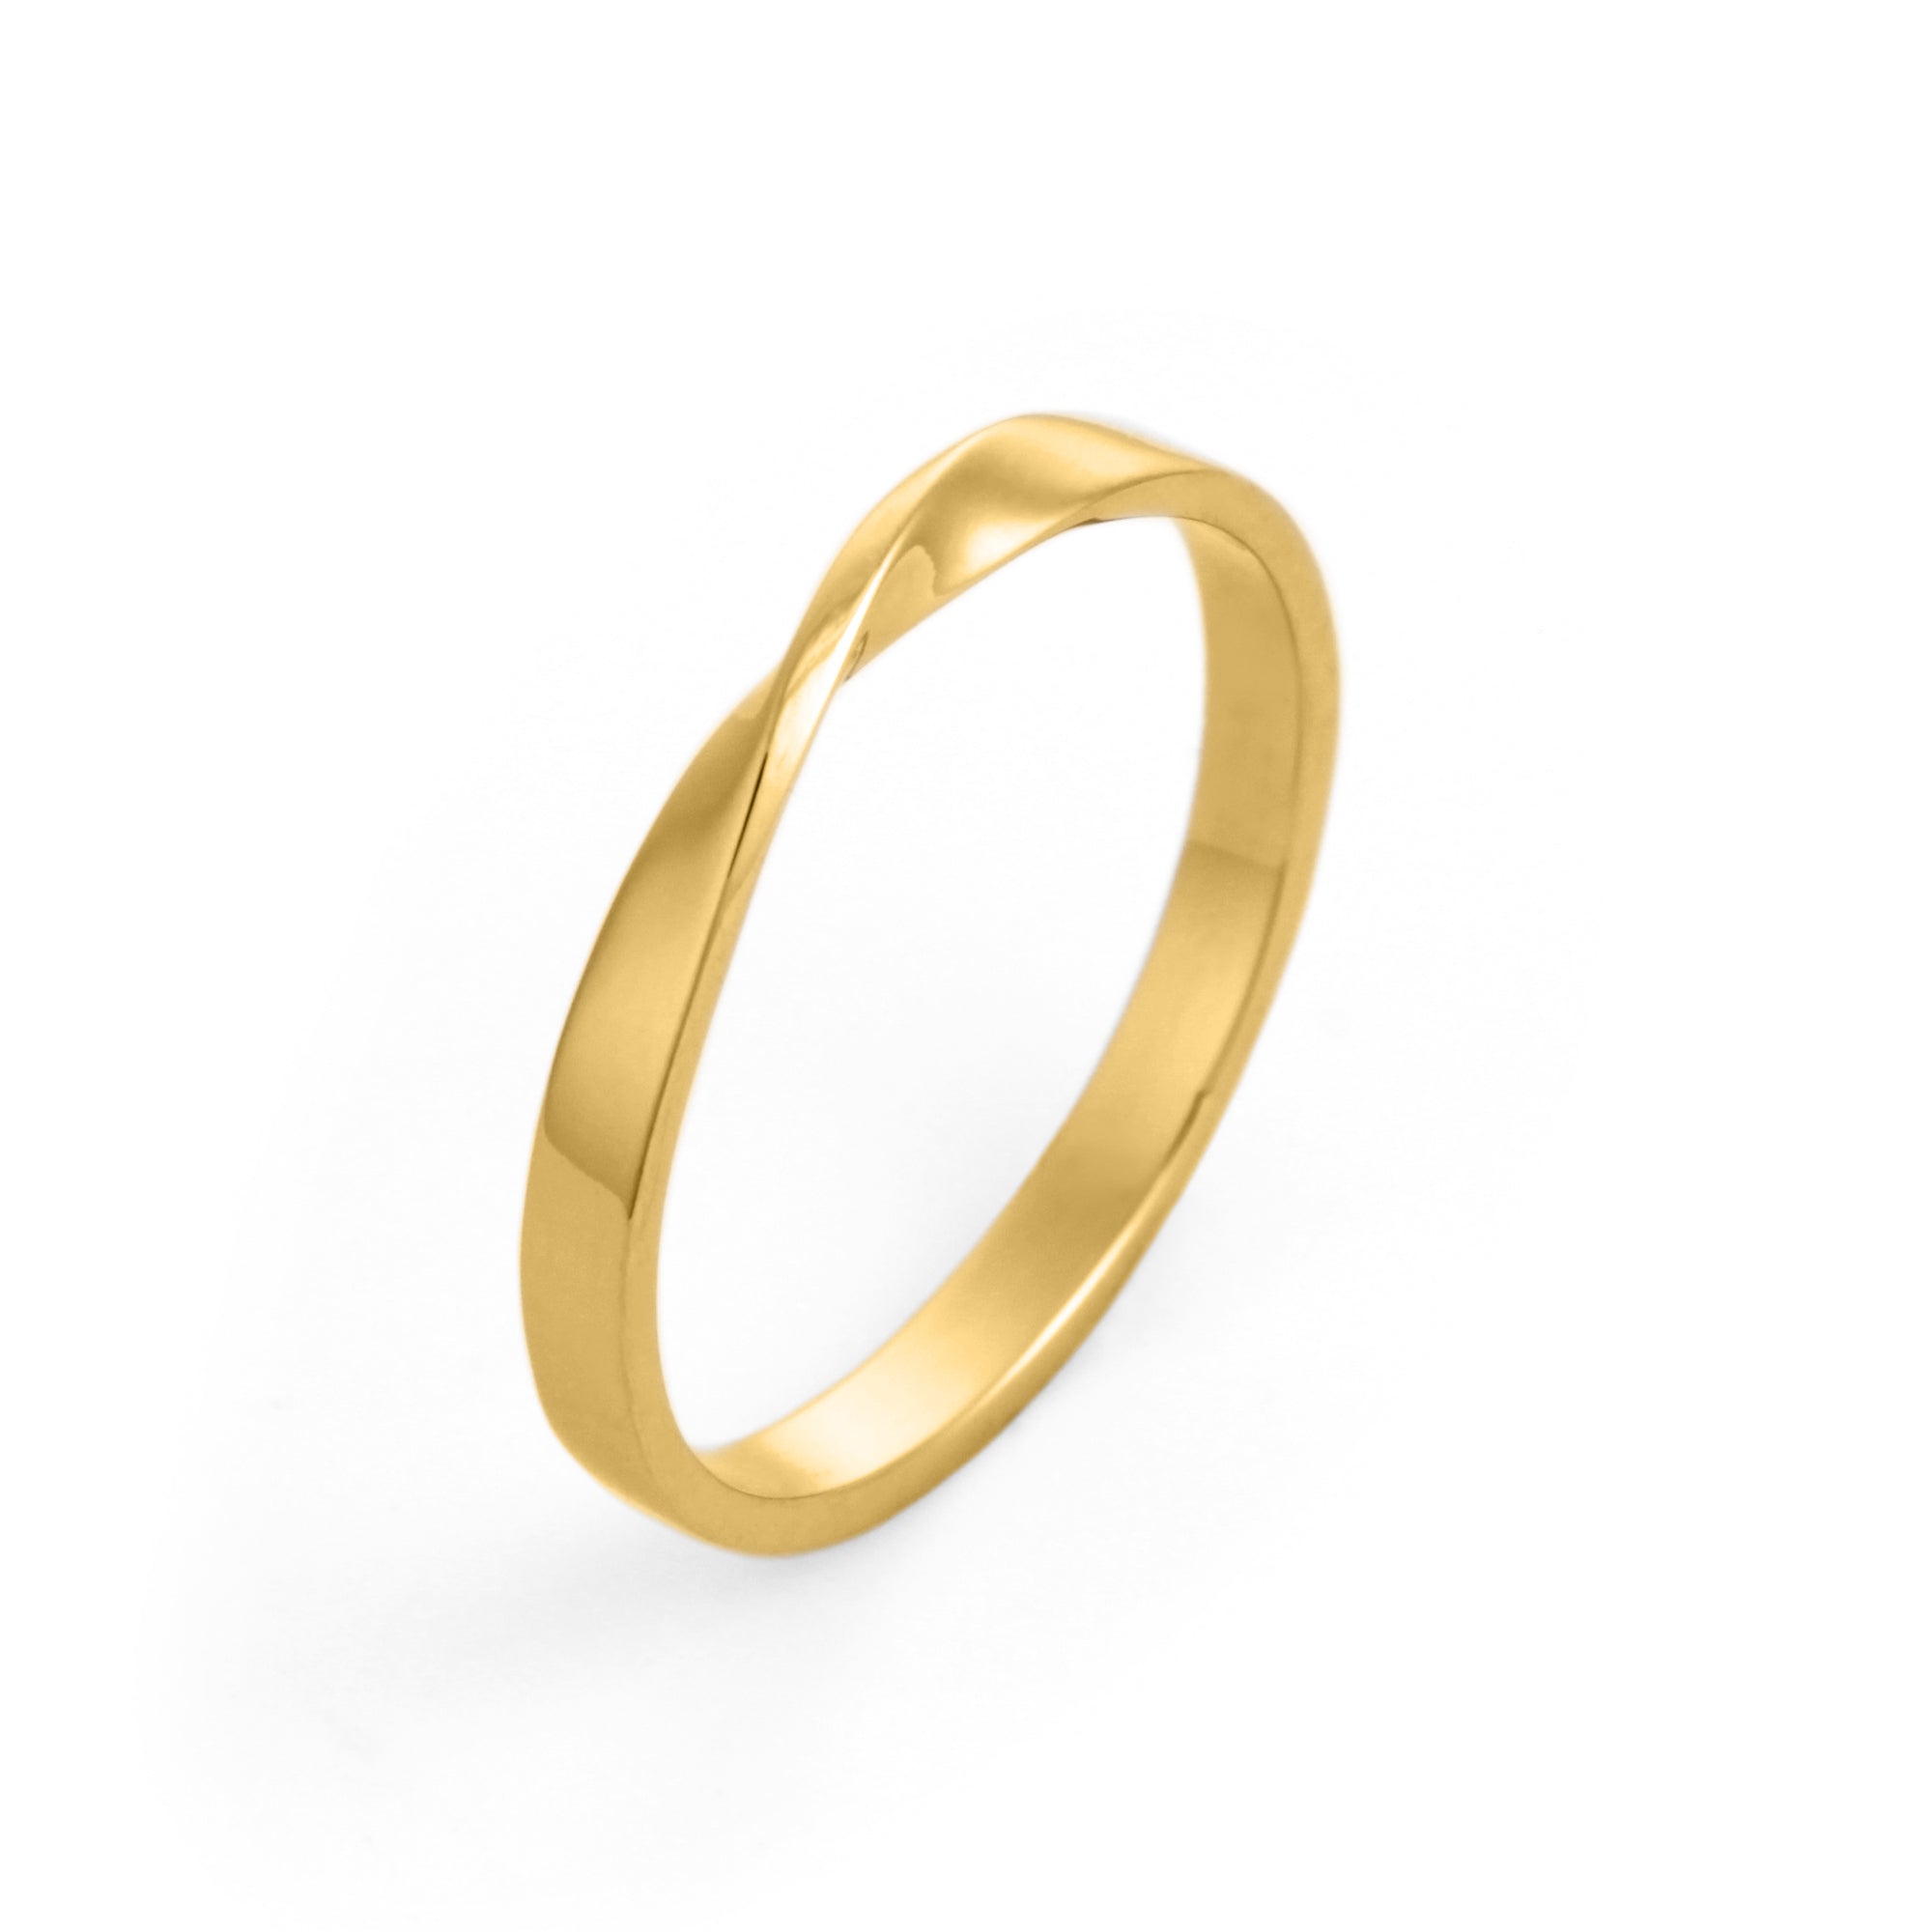 Buy Men's 5mm Yellow Gold Wedding Ring Band, Flat Men's Wedding Band,  Simple Wedding Band for Him, Modern Plain Band in 10K 14K 18K Solid Gold  Online in India - Etsy